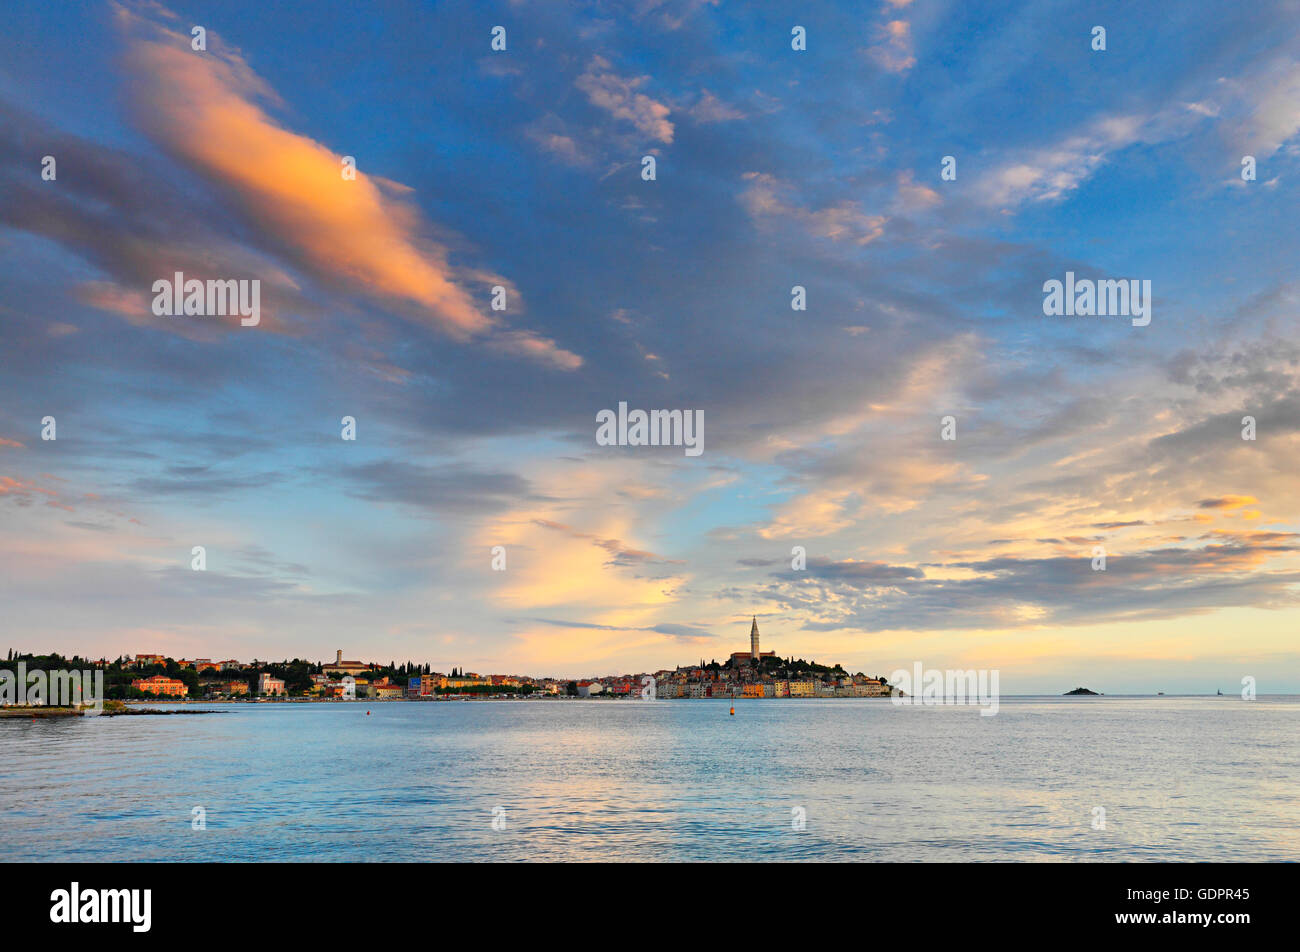 Landscape of Rovinj town at sunset Stock Photo